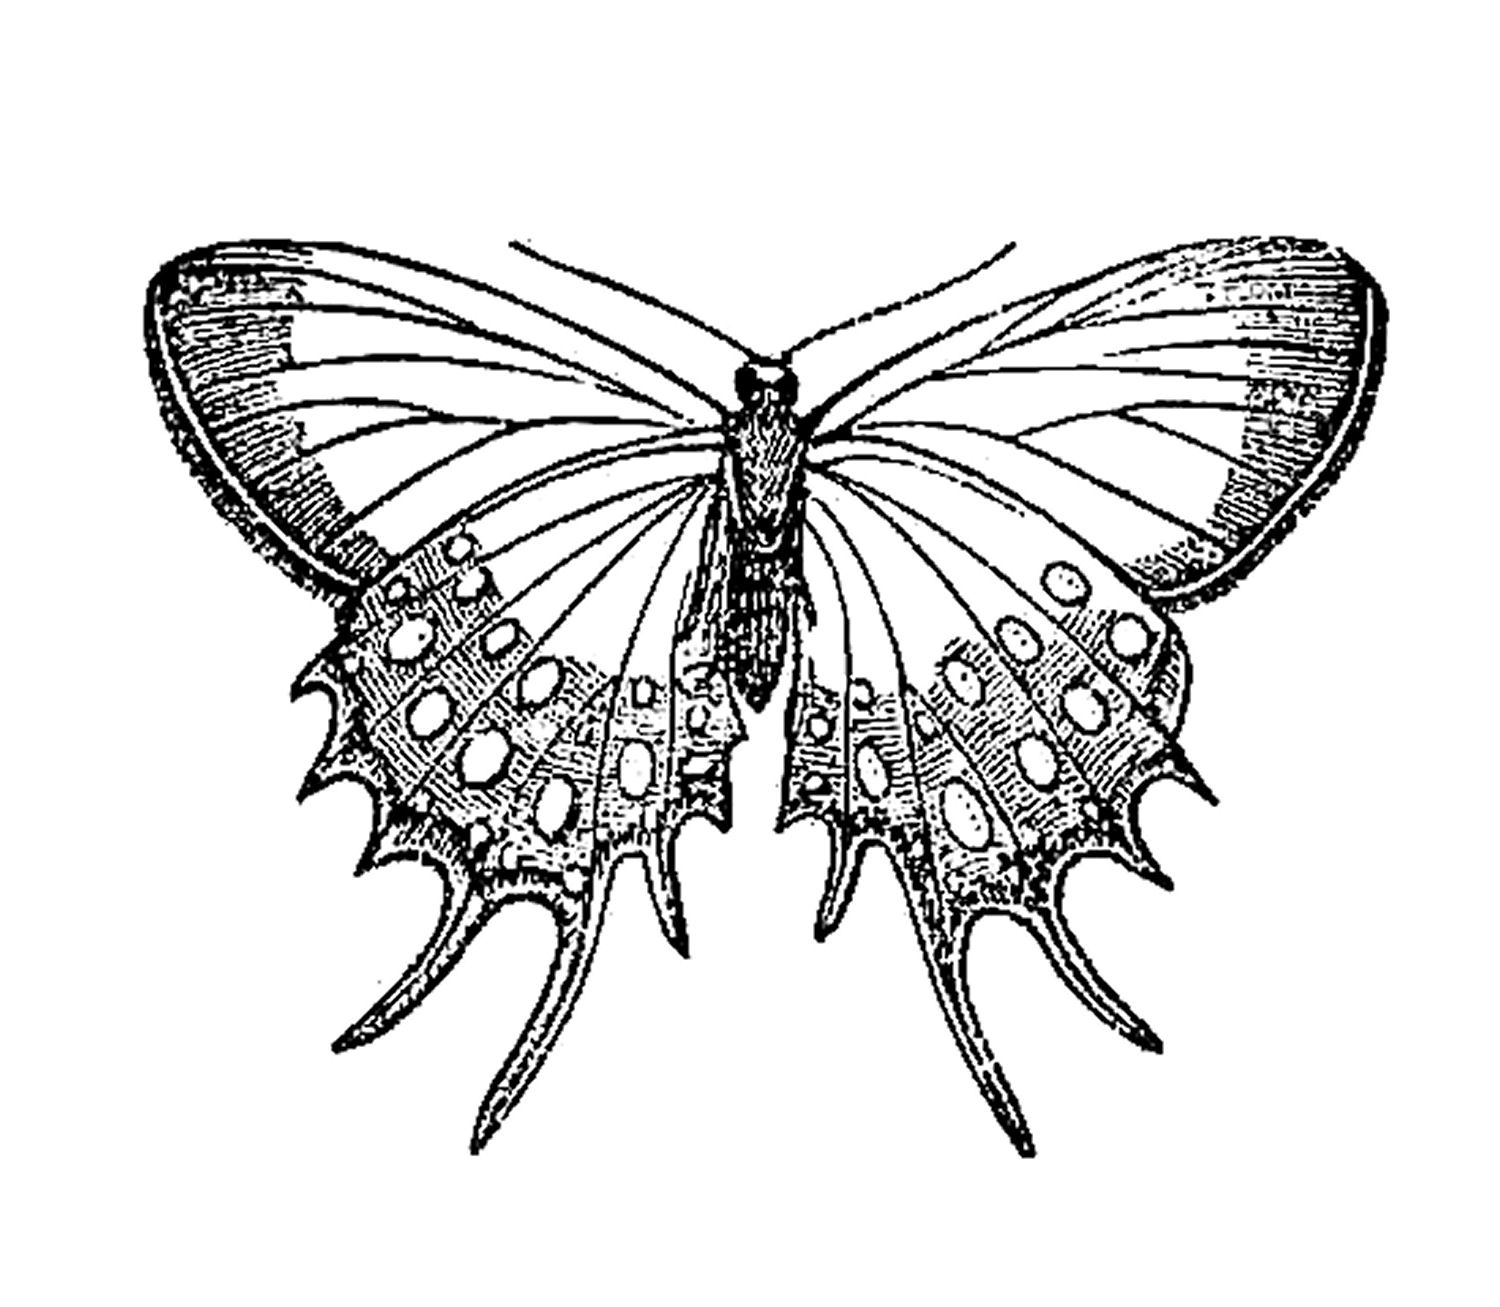 Vintage Insect Clip Art  Butterfly Graphic Design From Natural History